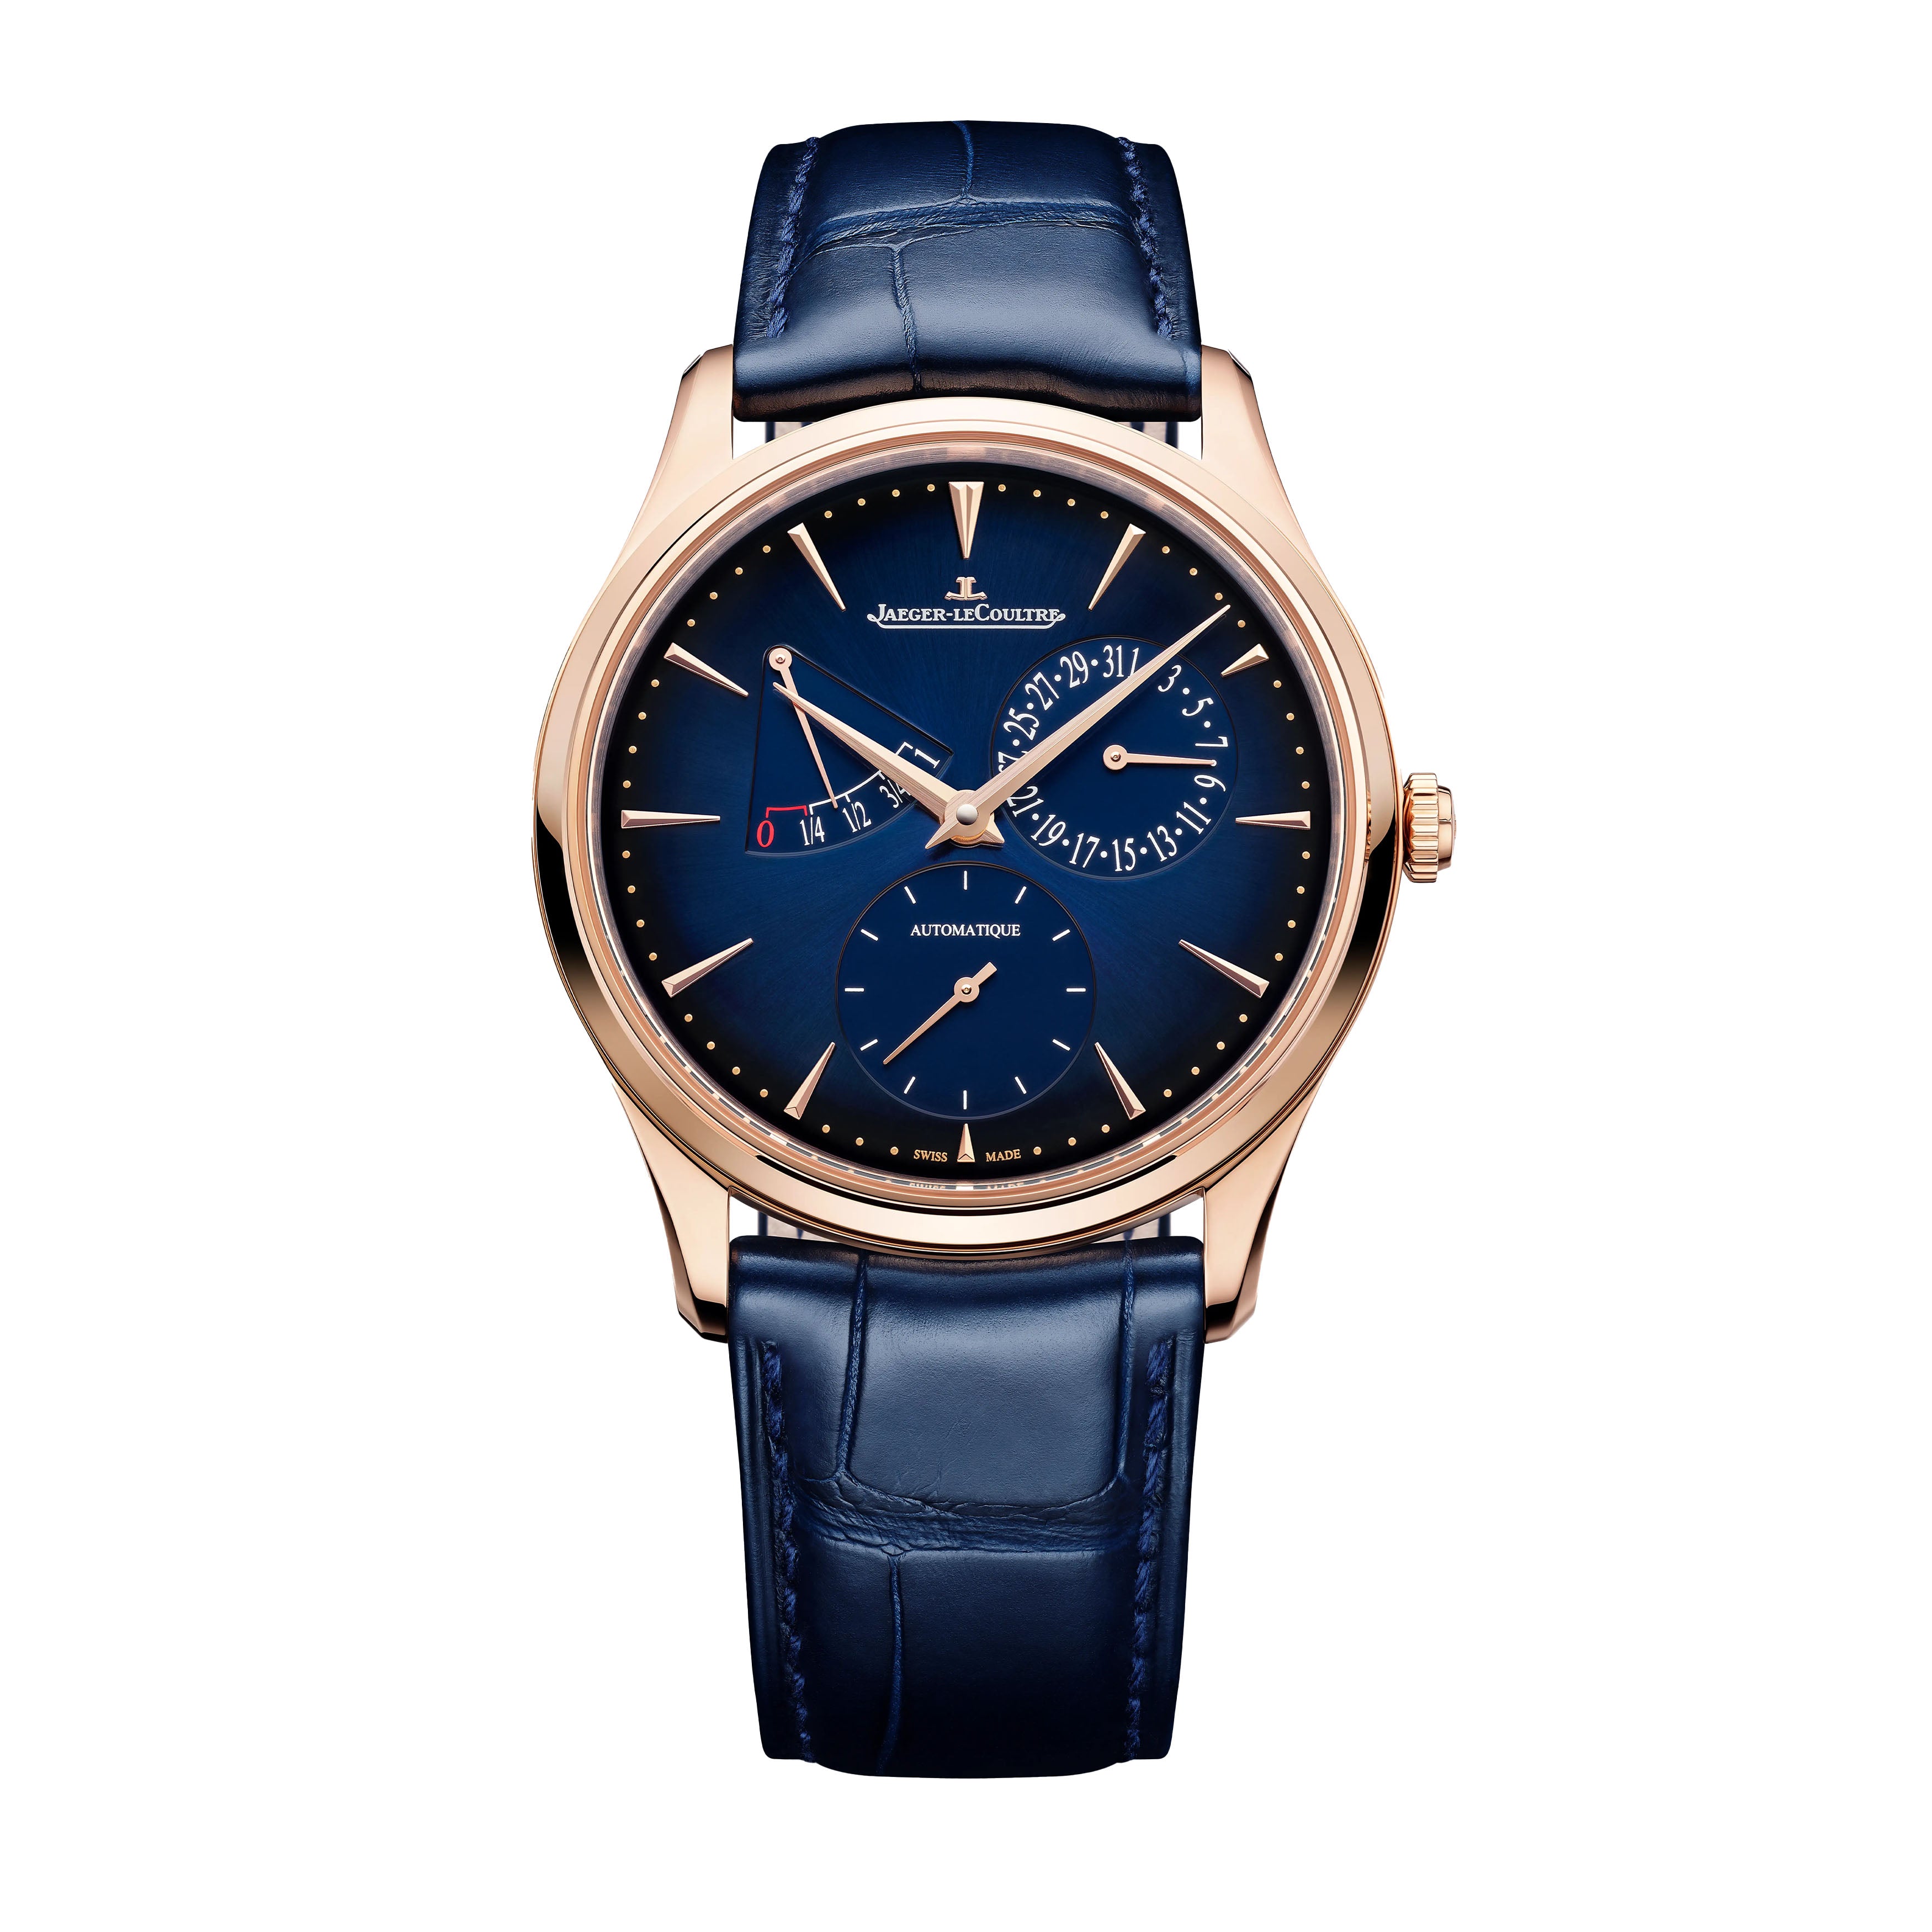 Jaeger-LeCoultre Master Ultra Thin Power Reserve Watch, 39mm Blue Dial, Q137258J